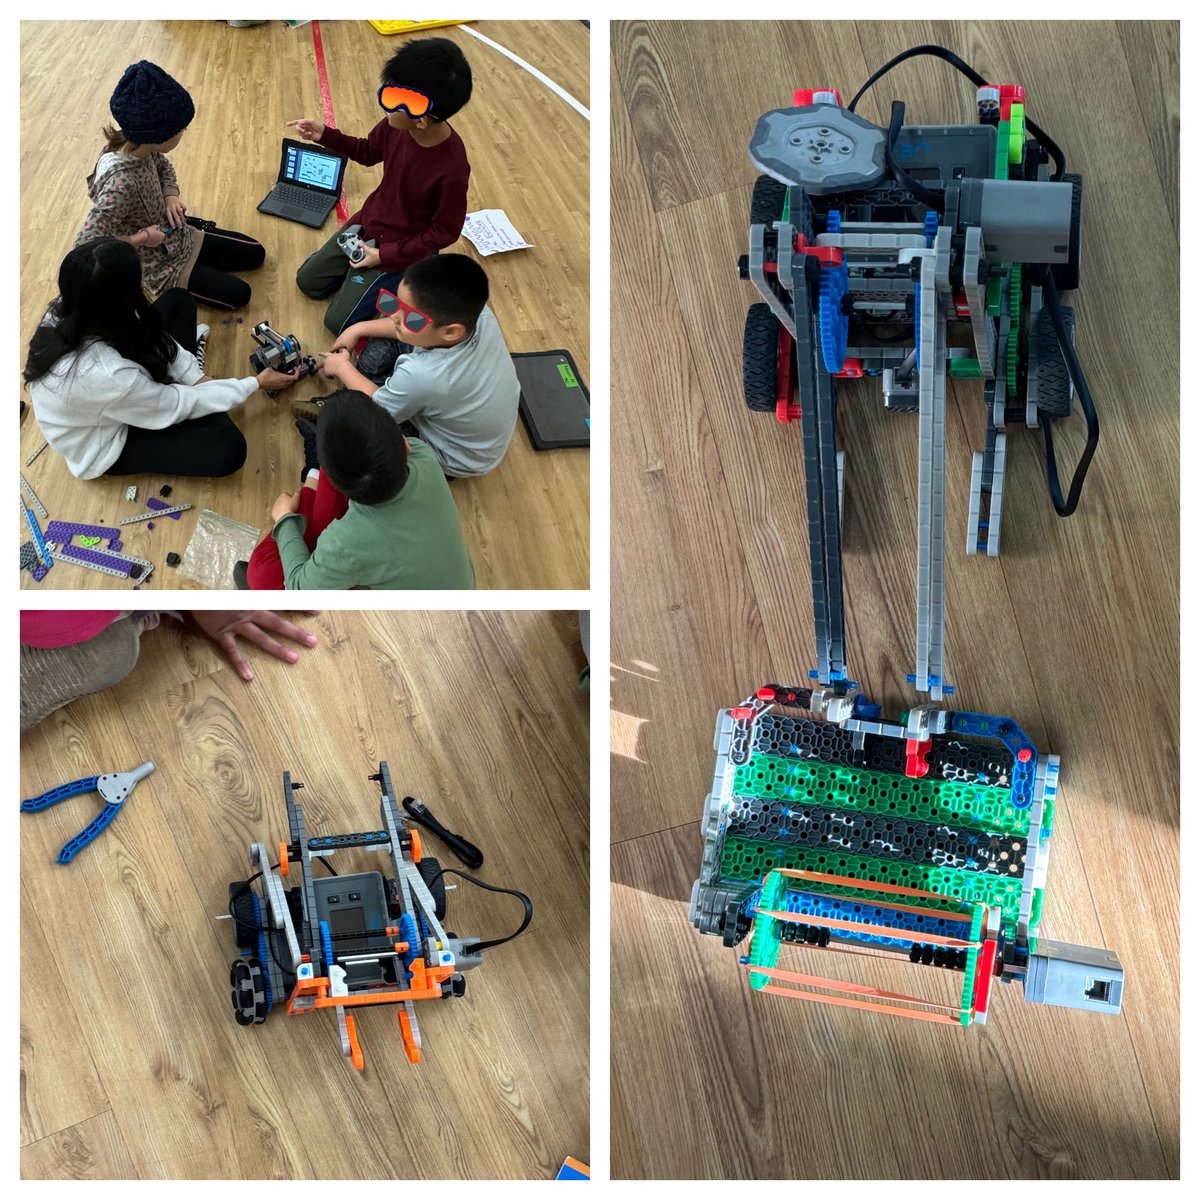 A few photos of our @CowlishawKoalas Robotics Teams hard at work. Over the last few weeks, they’ve been refining their designs, preparing for team interviews, updating firmware, & testing design elements for our upcoming competition. @ipef204 @IPSD_WOW #VexIQ @BookCreatorApp